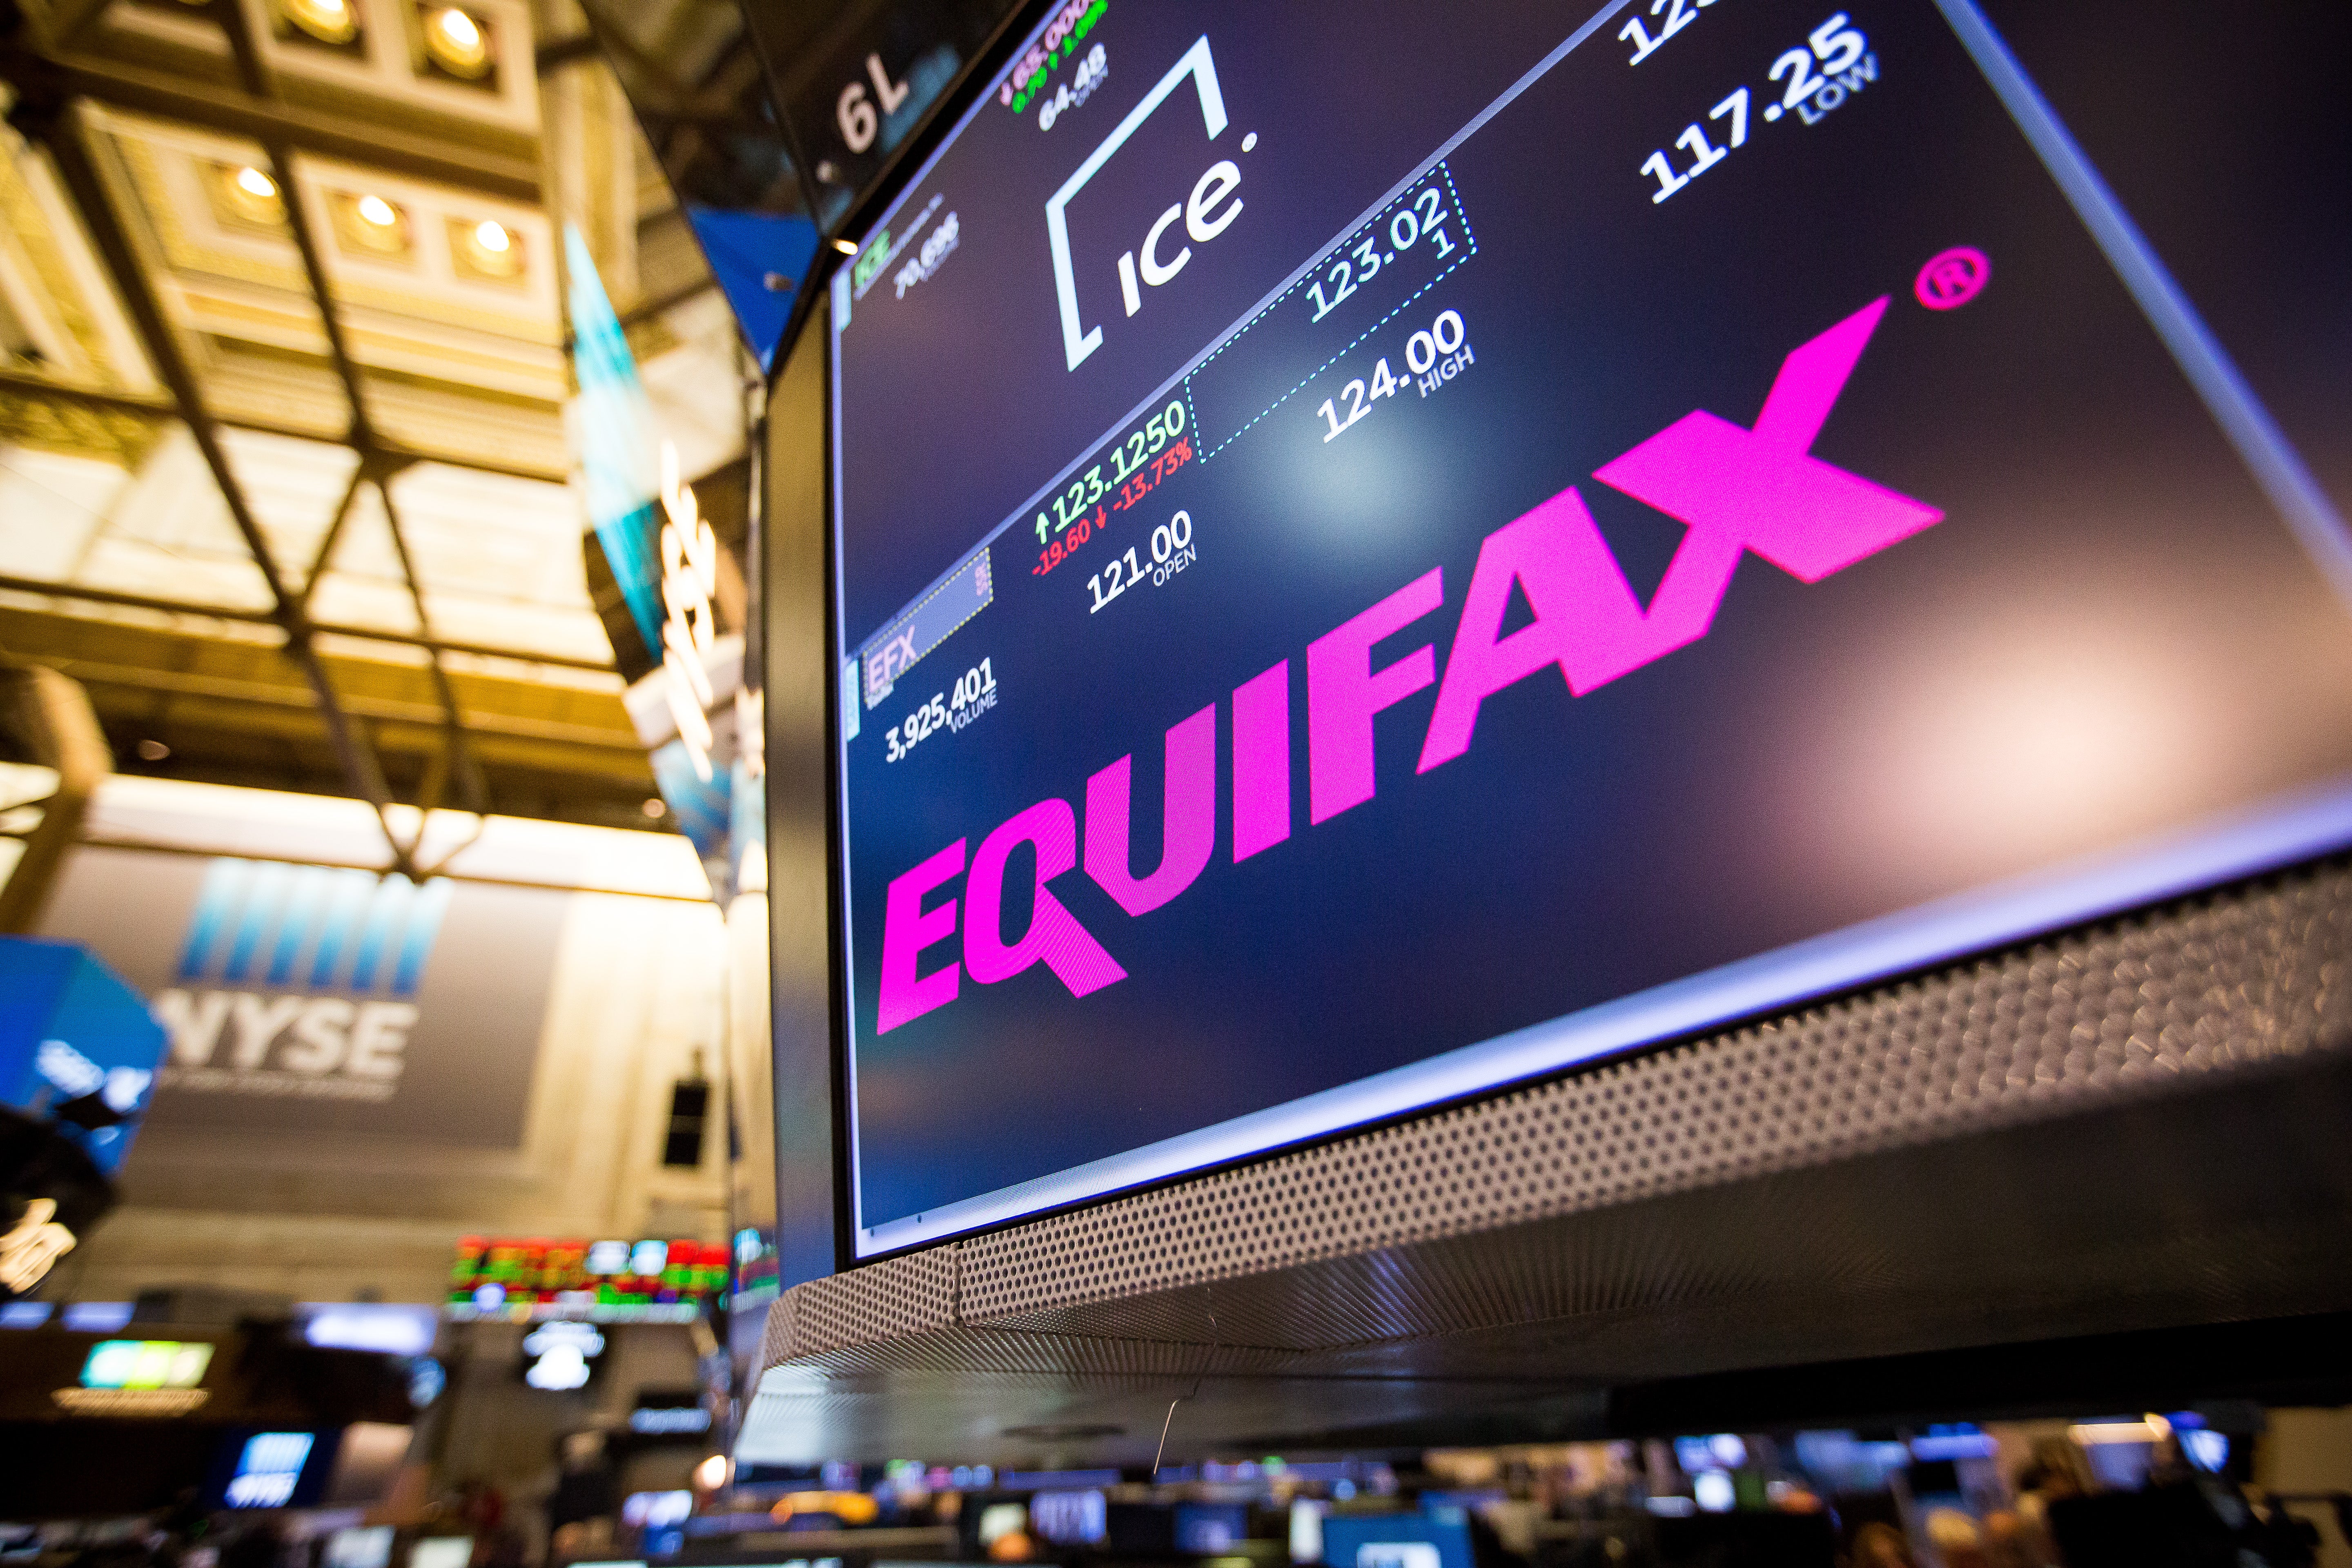 5 Things You Need To Know About The Equifax Hack
